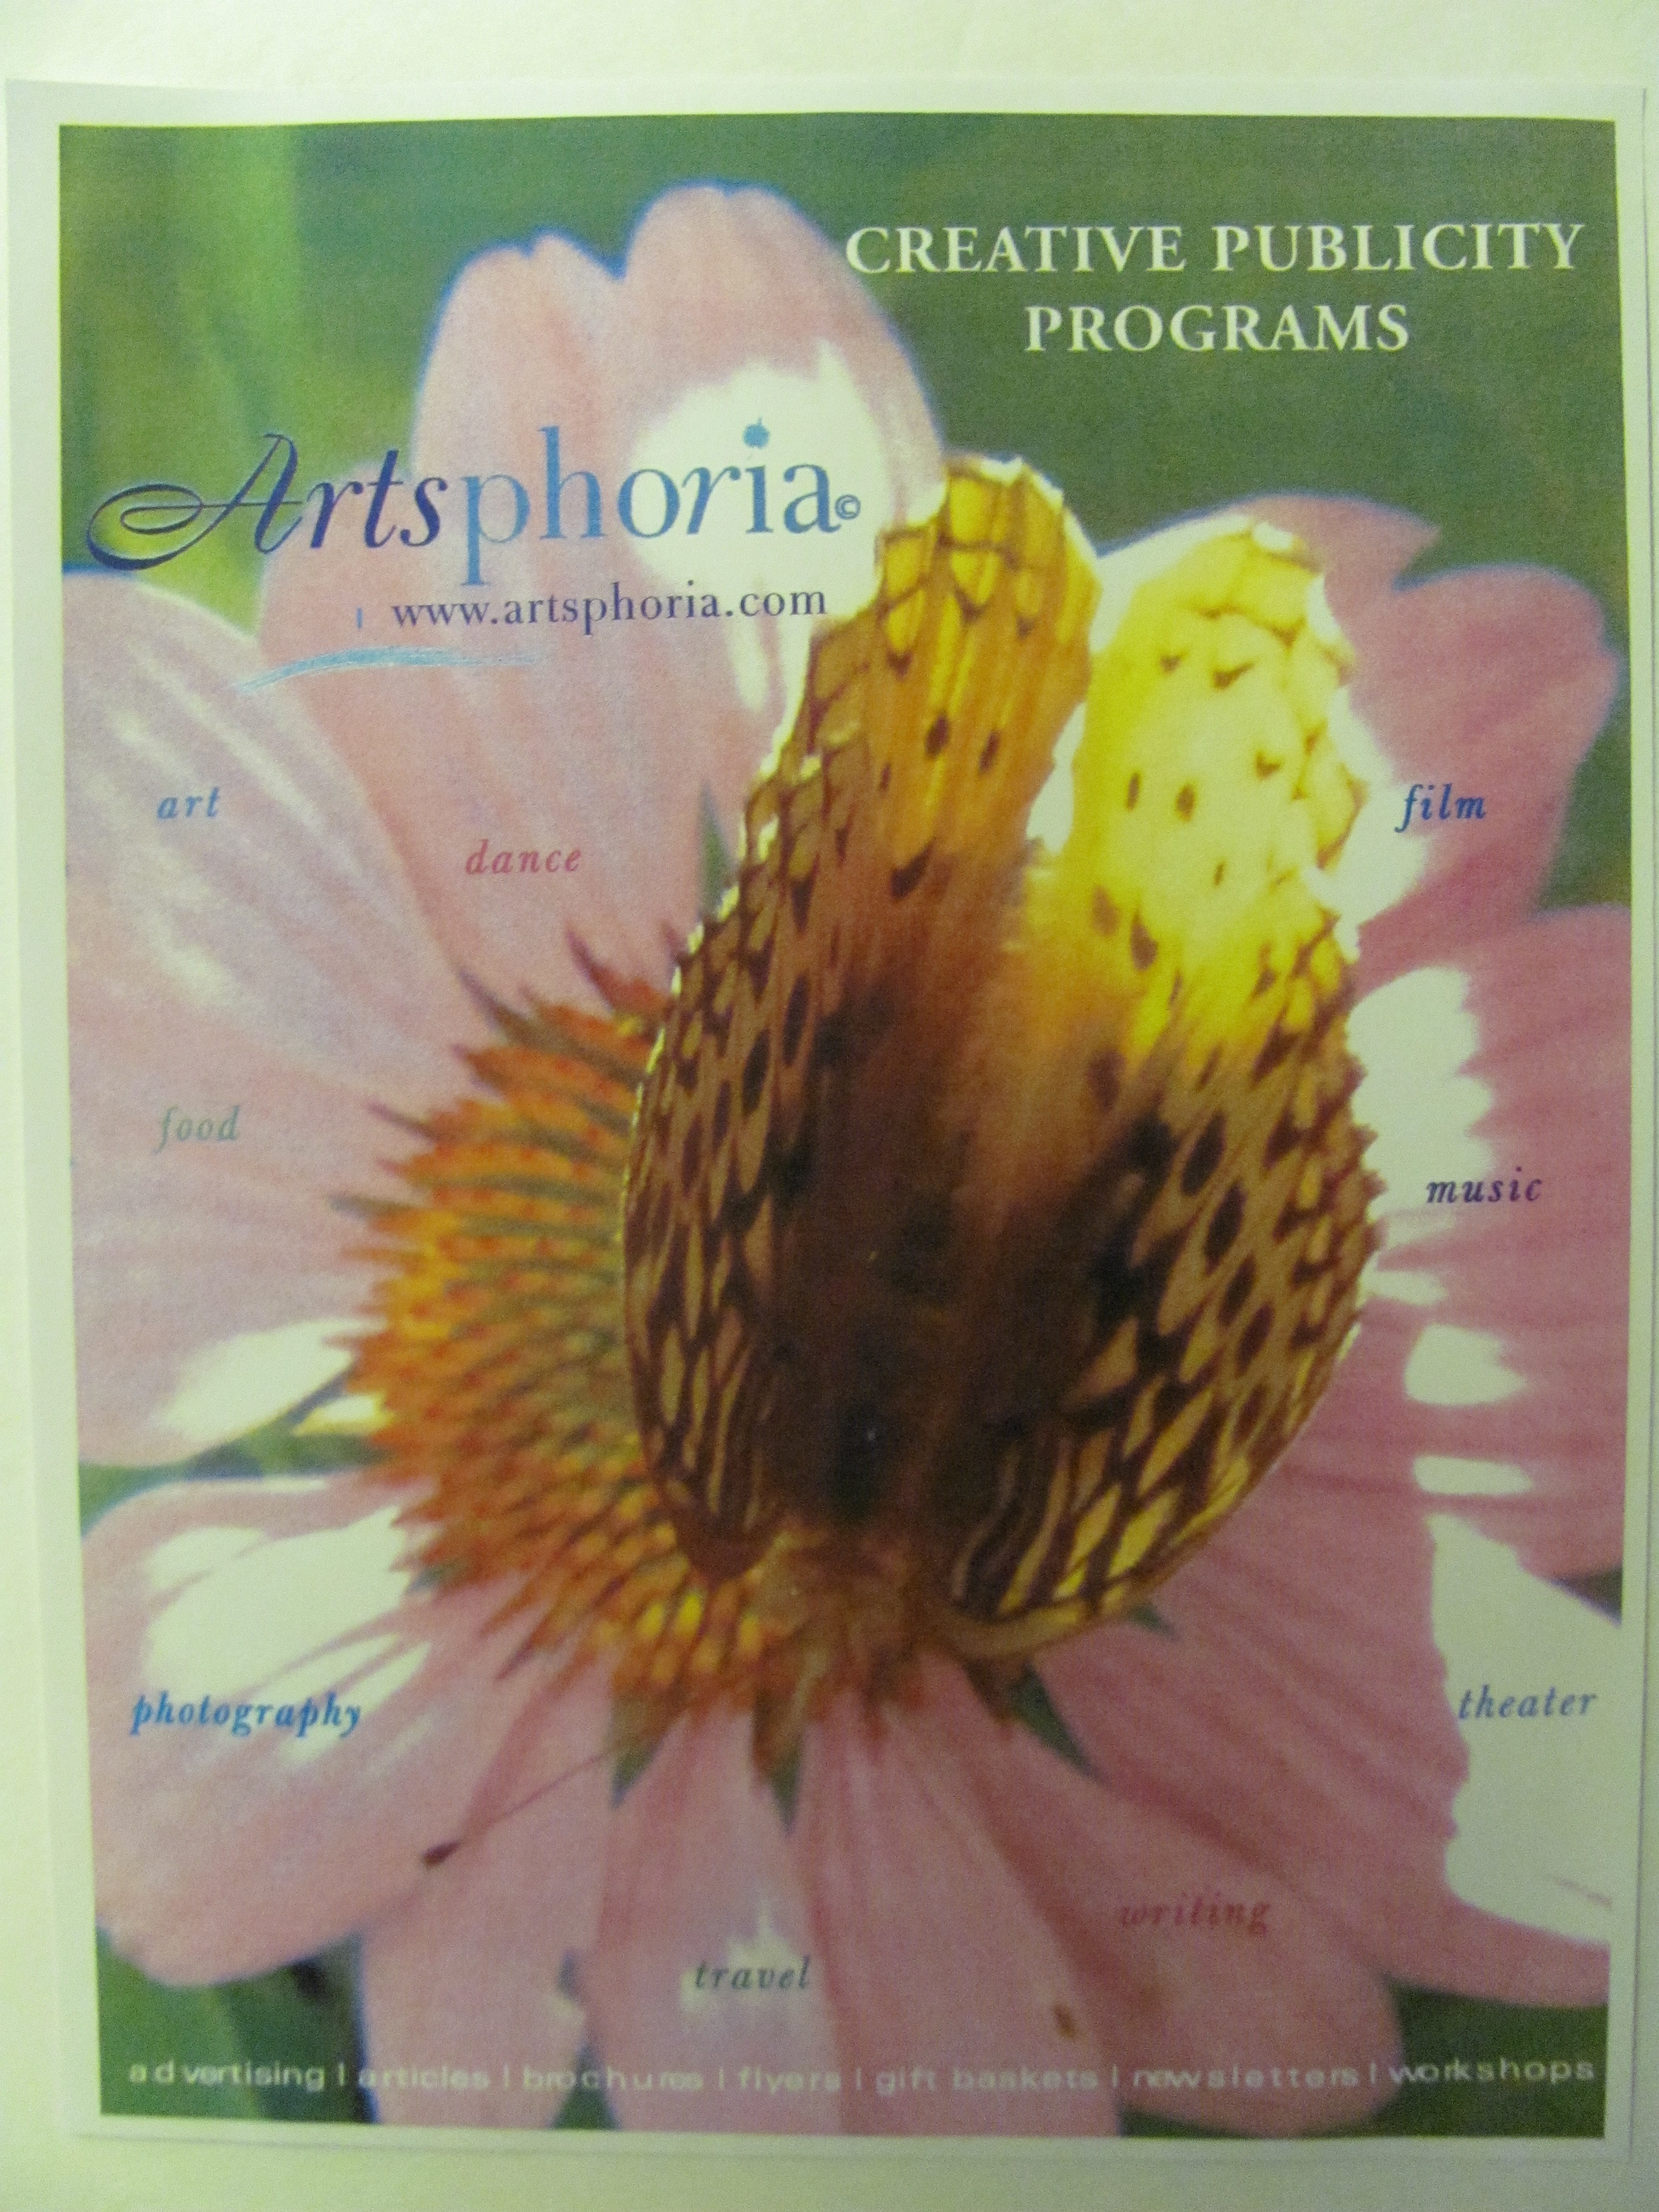 The original image for Artsphoria is still the core of this expanded magazine and boutique edition.